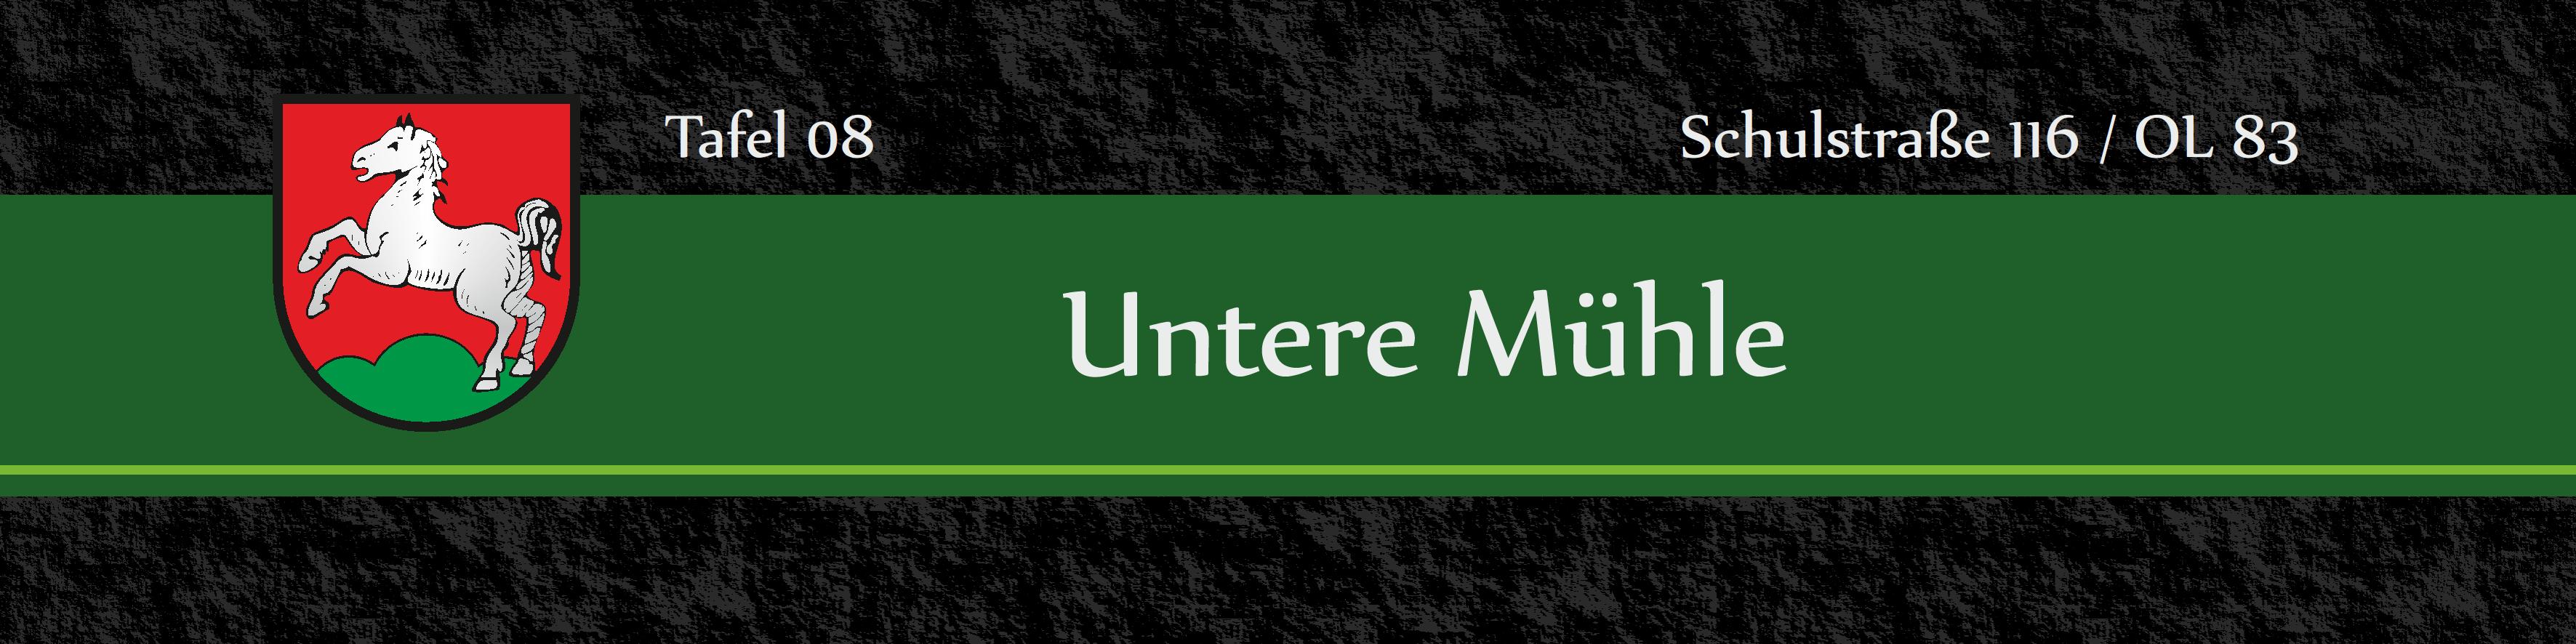 08 Untere Mhle